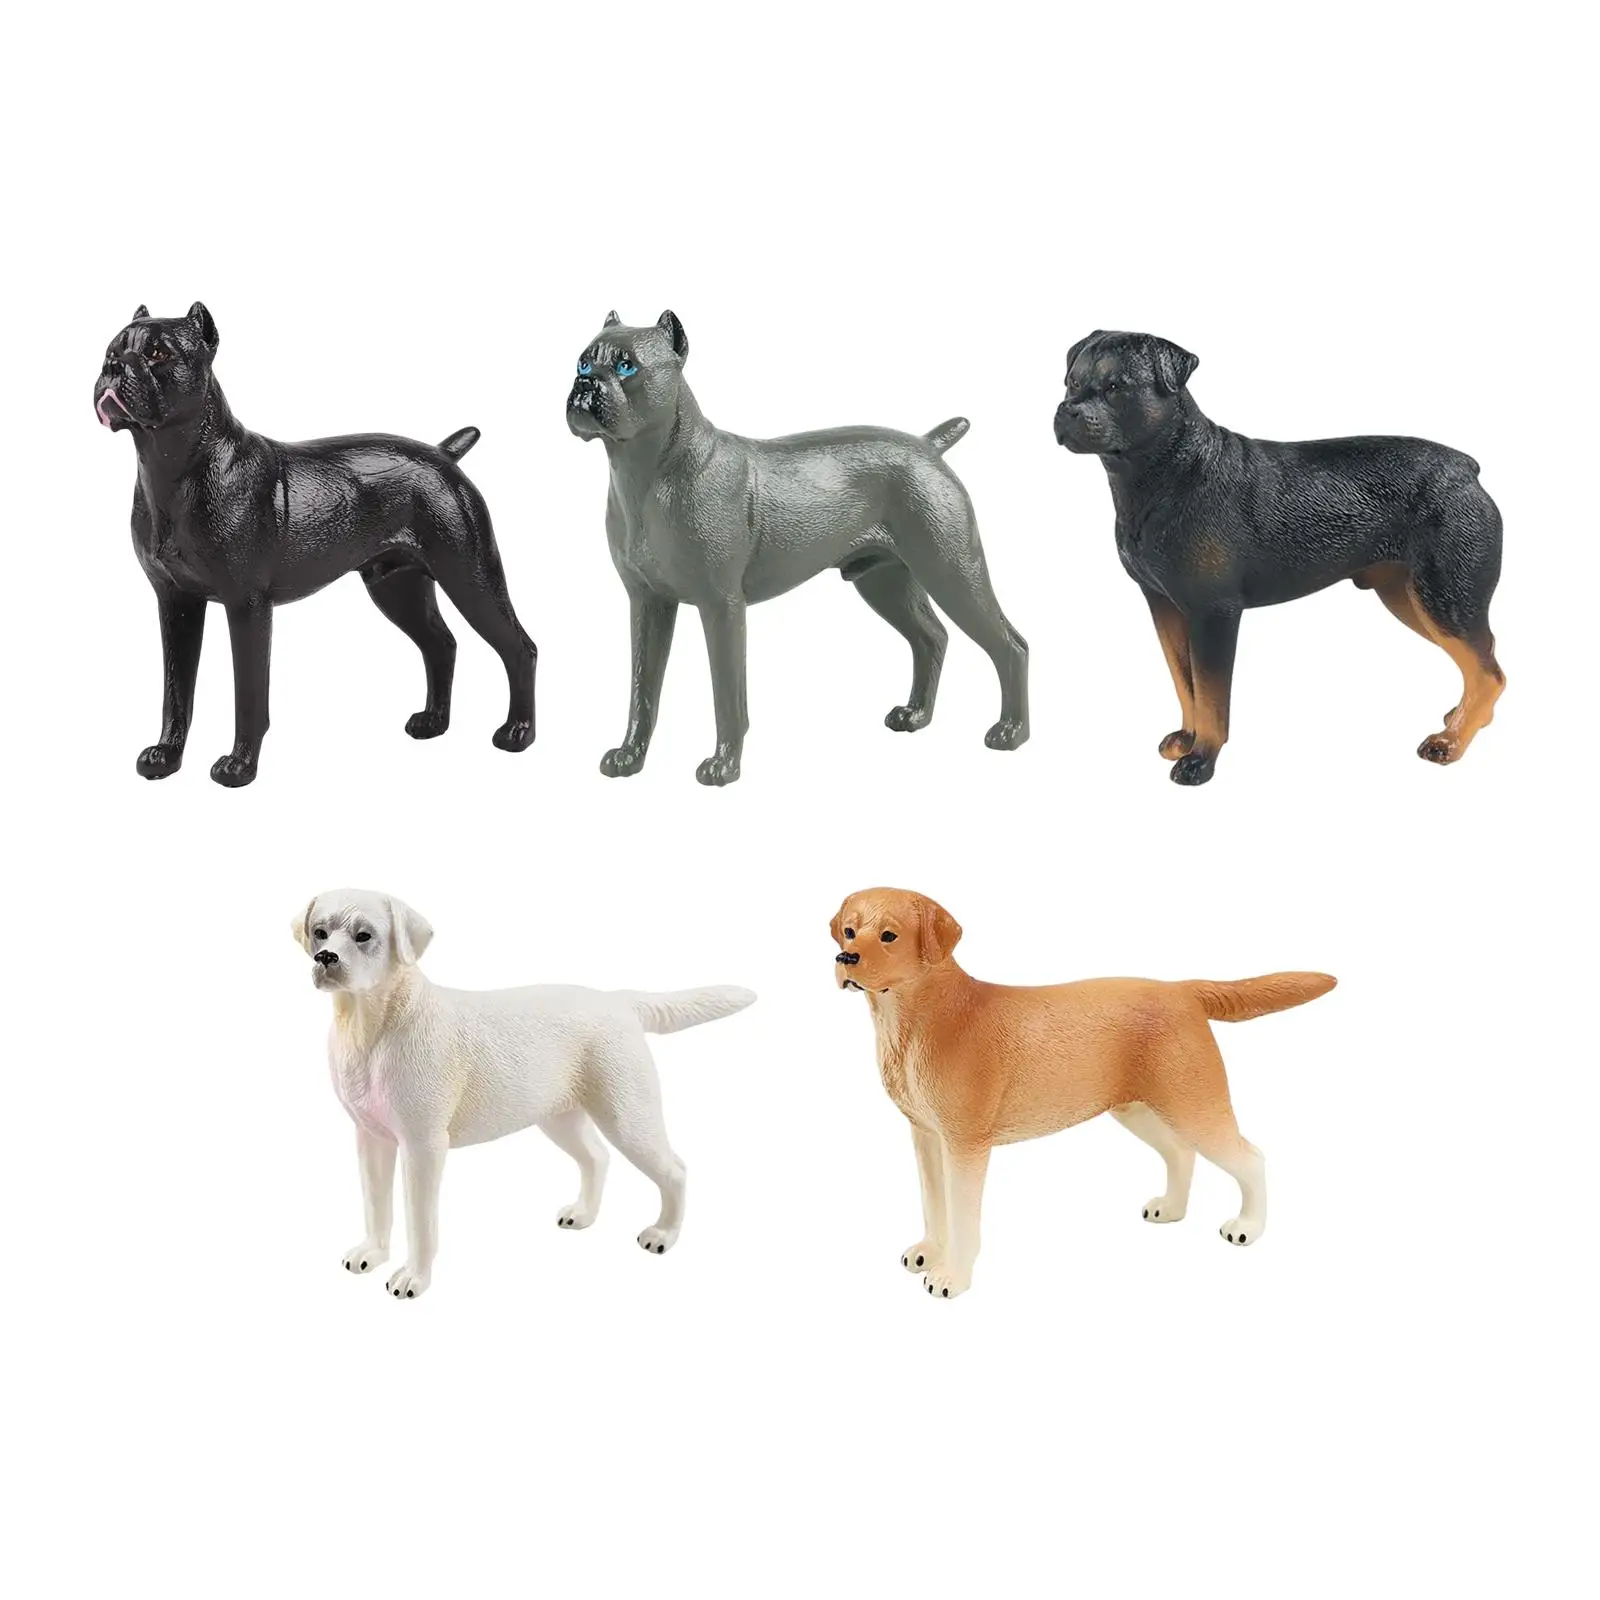 Simulation Dog Figurine Models for Sand Table Party Favors Cake Topper